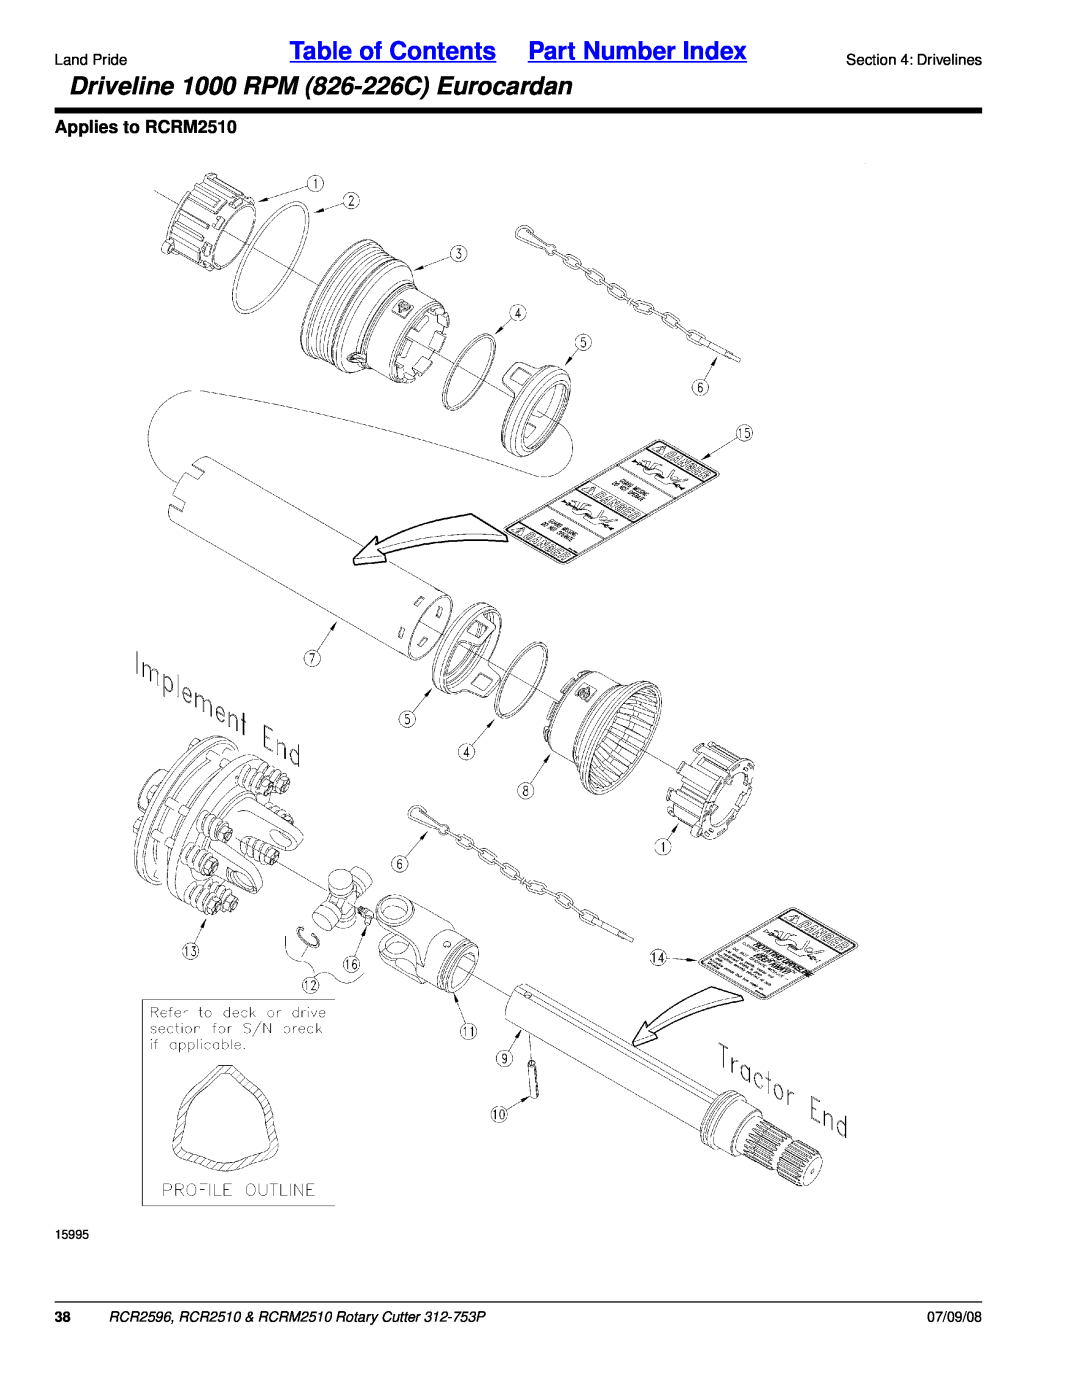 Land Pride RCR2510 manual Driveline 1000 RPM 826-226CEurocardan, Table of Contents Part Number Index, Applies to RCRM2510 